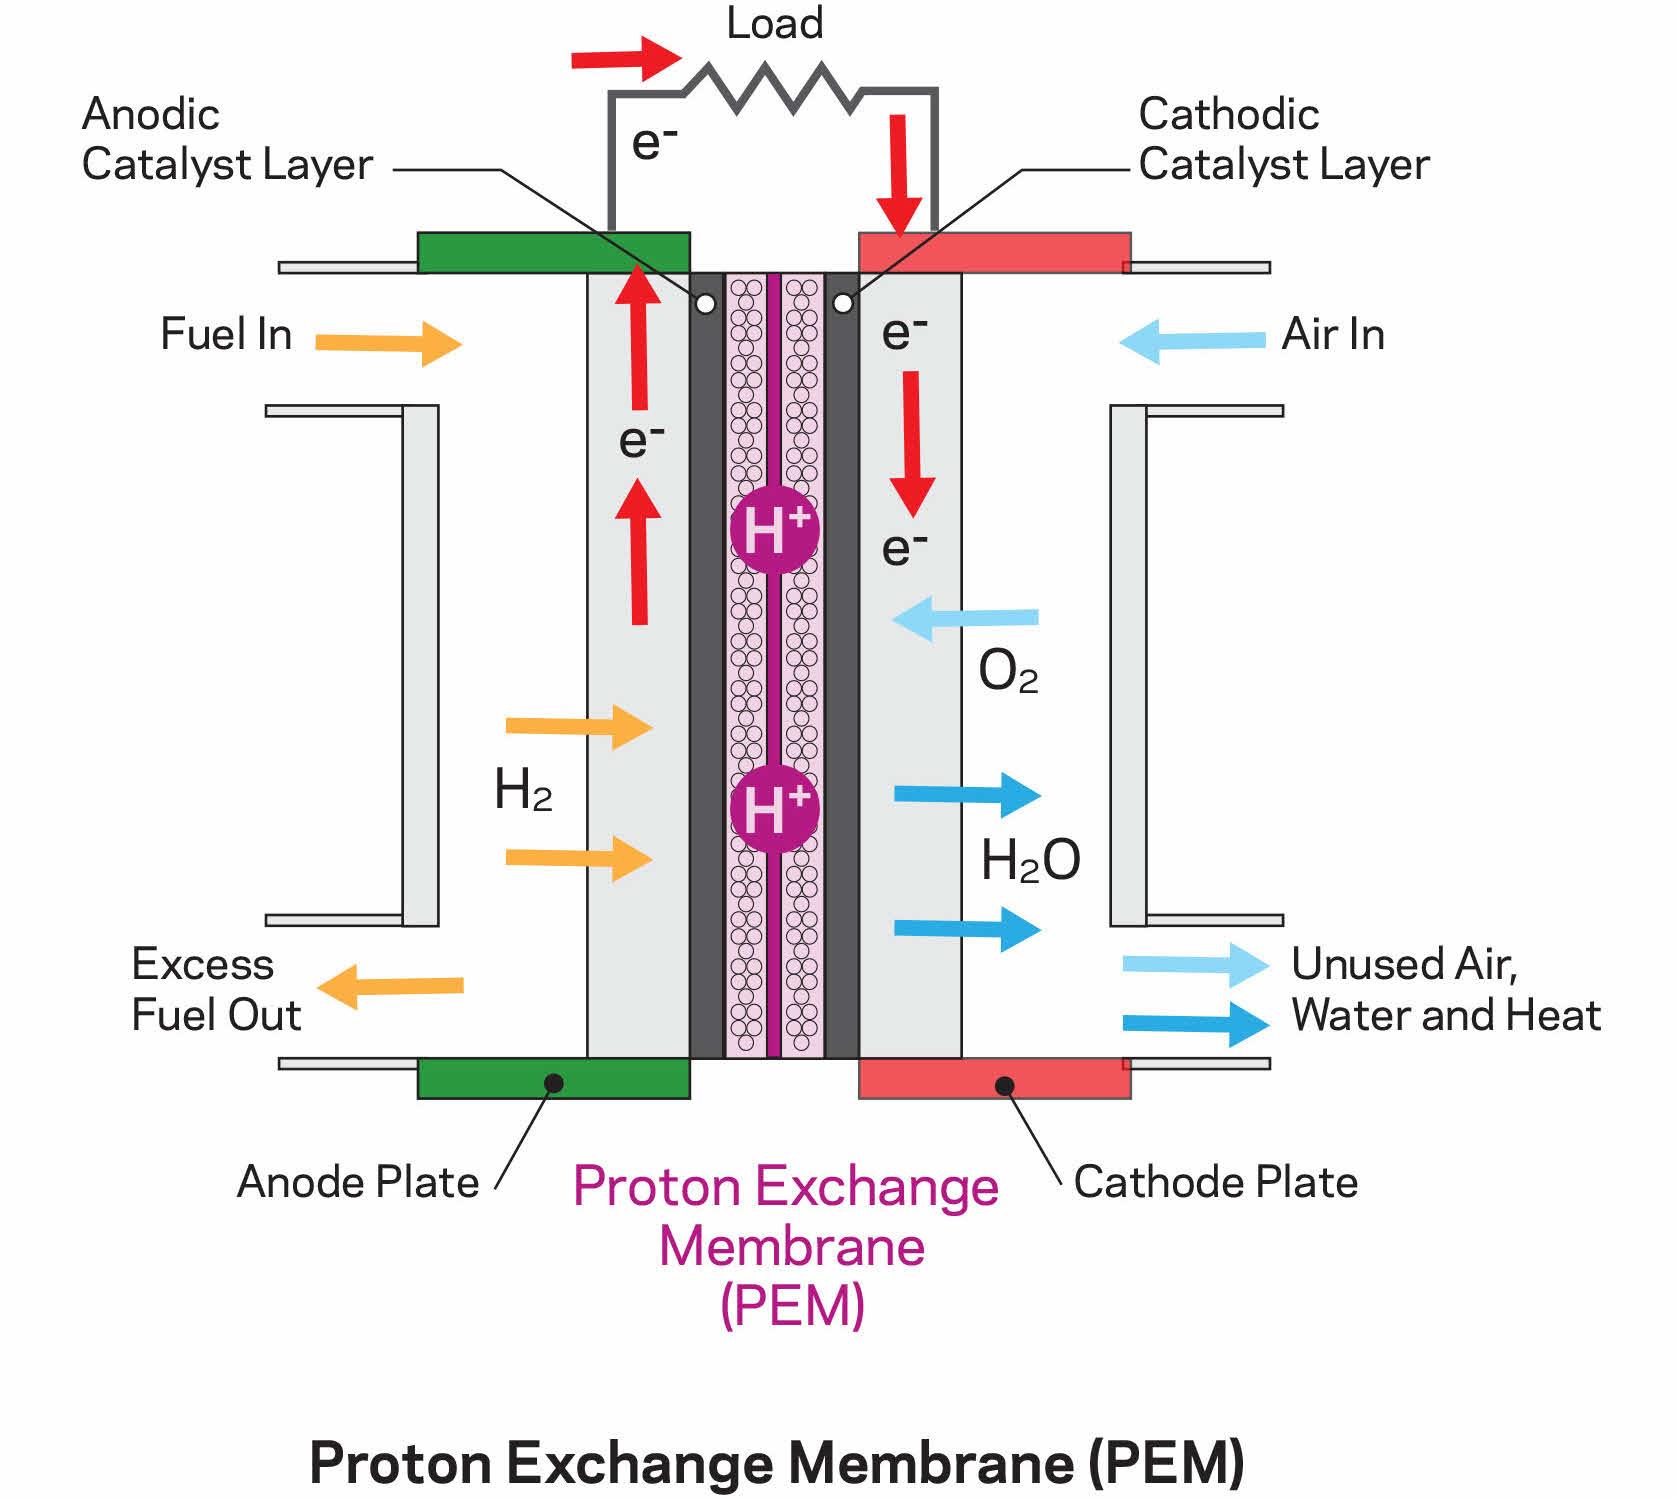 An image for a fuel cell diagram (PEM).